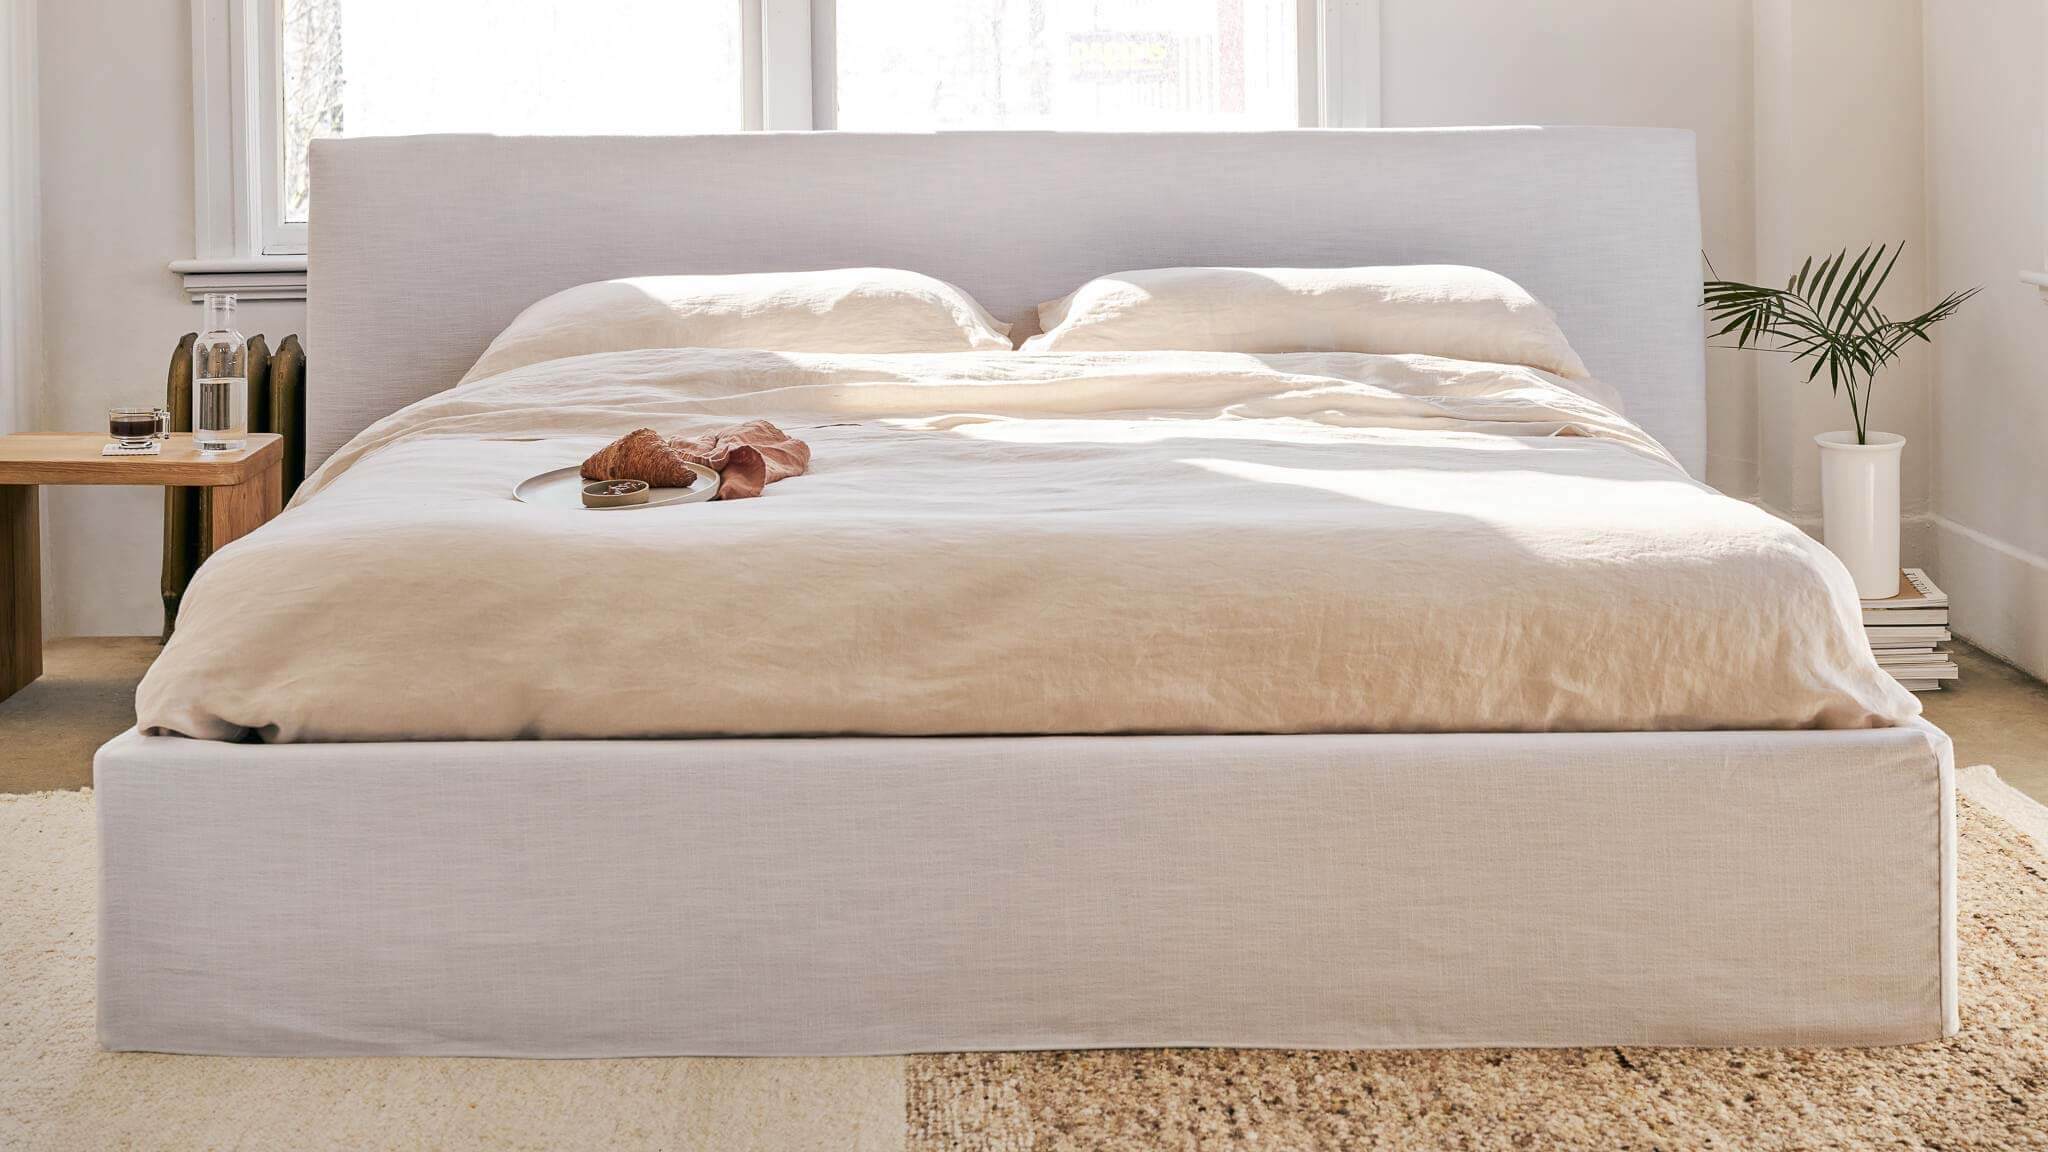 Wave Bed with Storage, King, White - Image 2